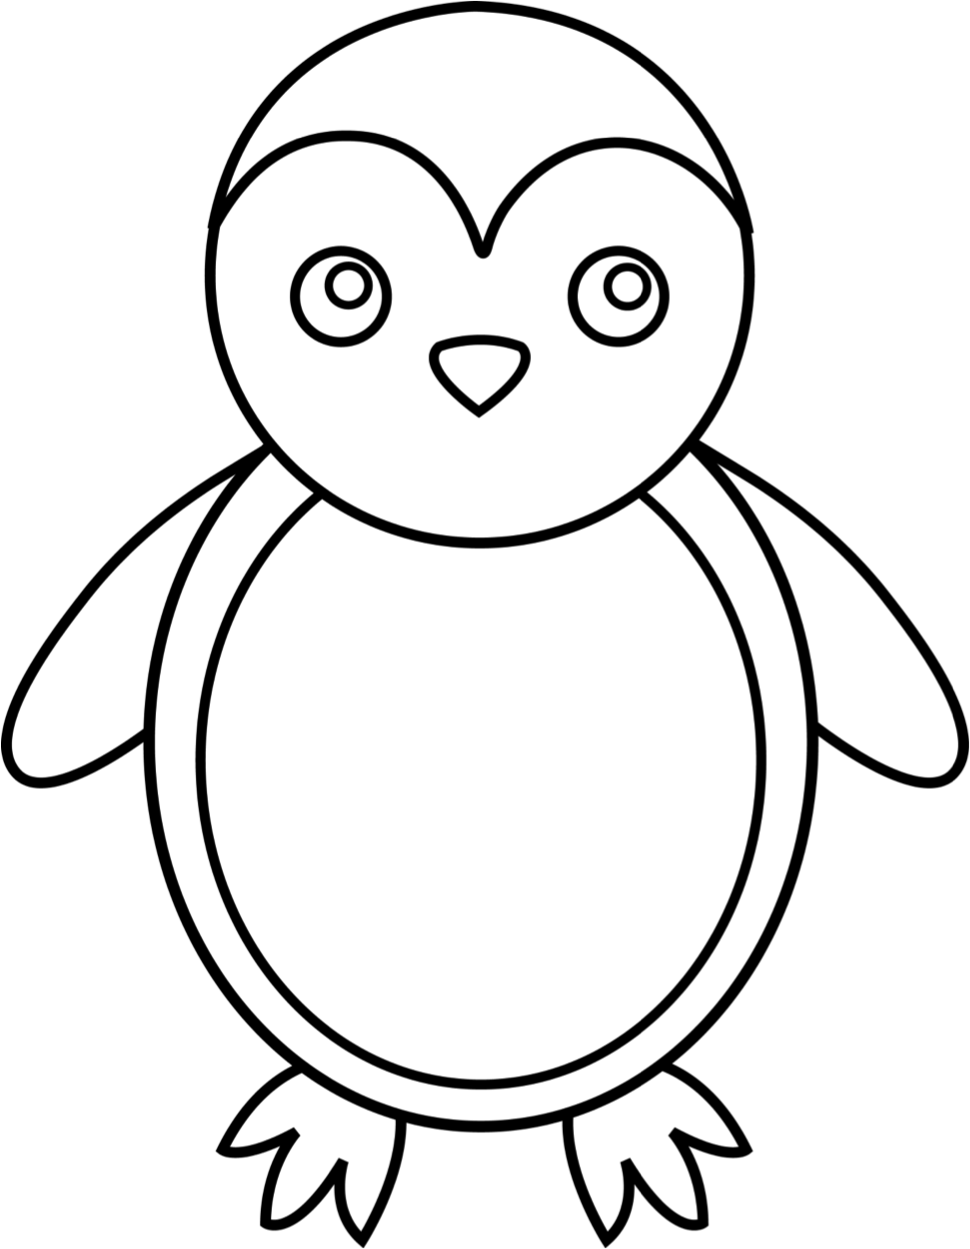 penguins clipart drawing